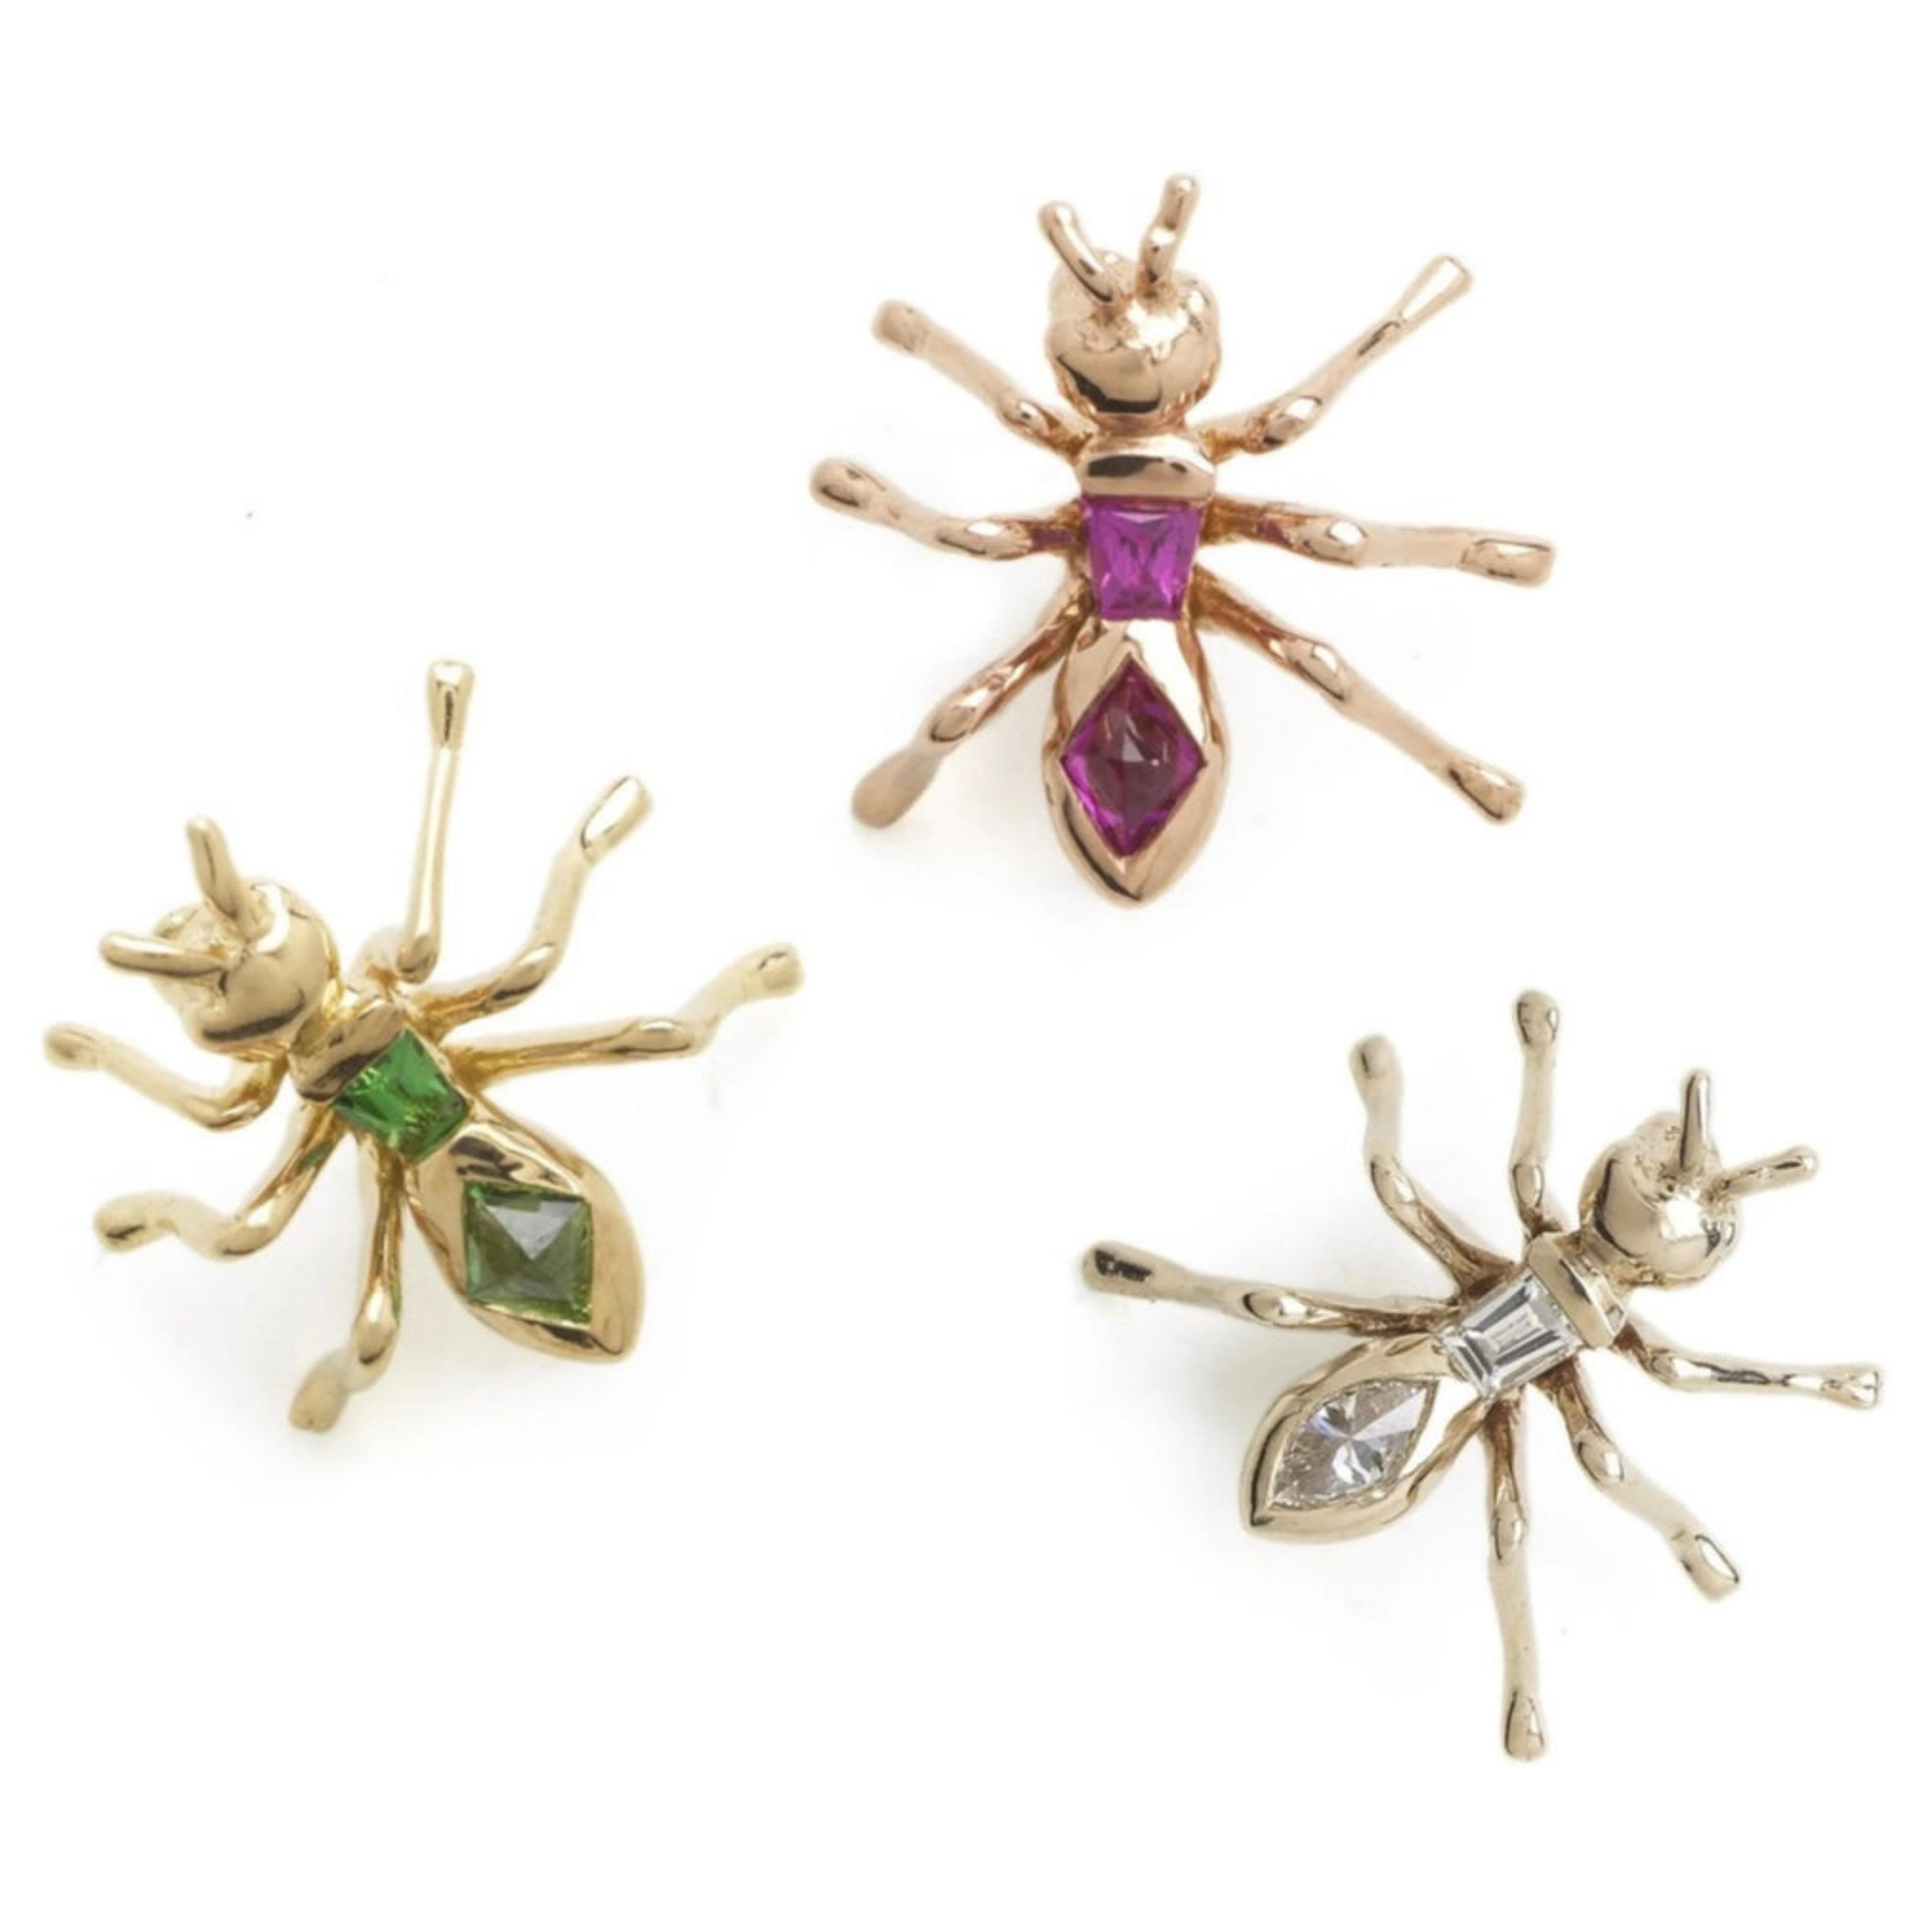 Bibi van der Velden Ant Single Stud Earring - White Diamond. Sculptural single earring in the shape of an ant with two white diamond stones forming the body. Photo showing all color stone options available.